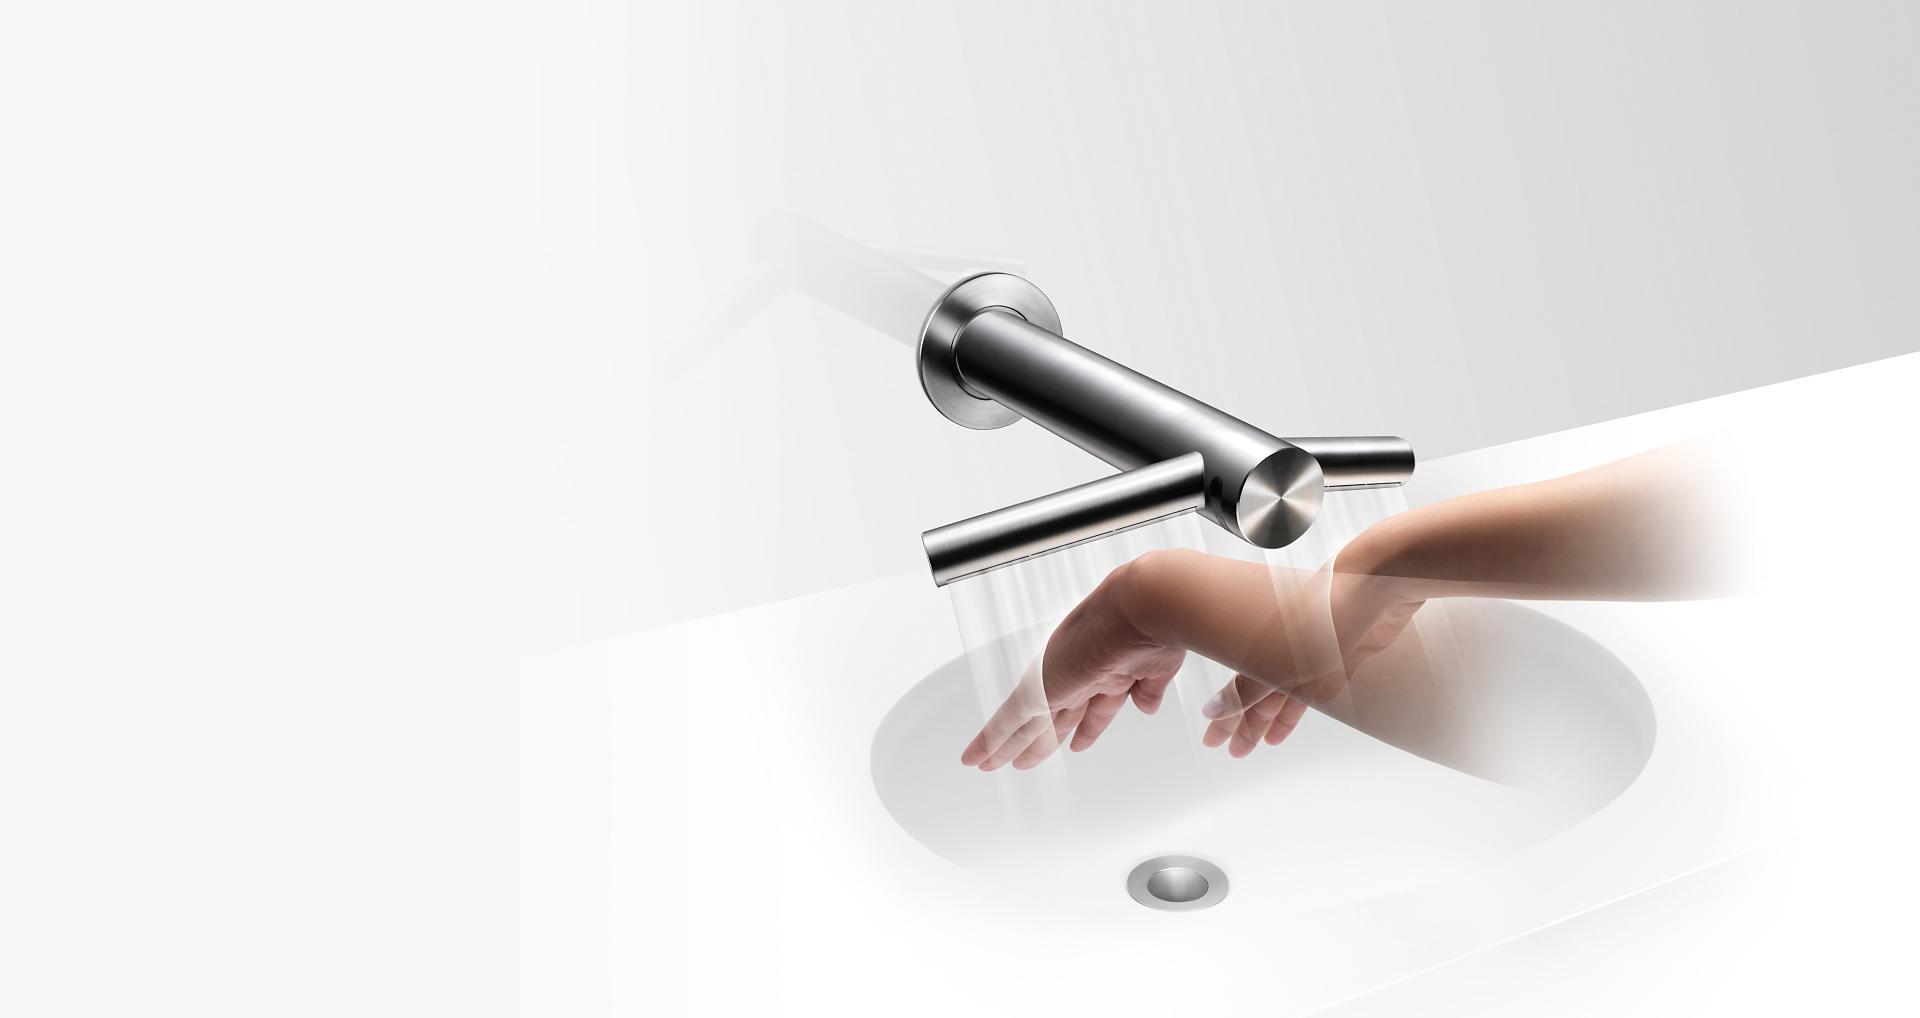 Features Dyson Airblade Wash Dry Hand Dryer Hand Dryers